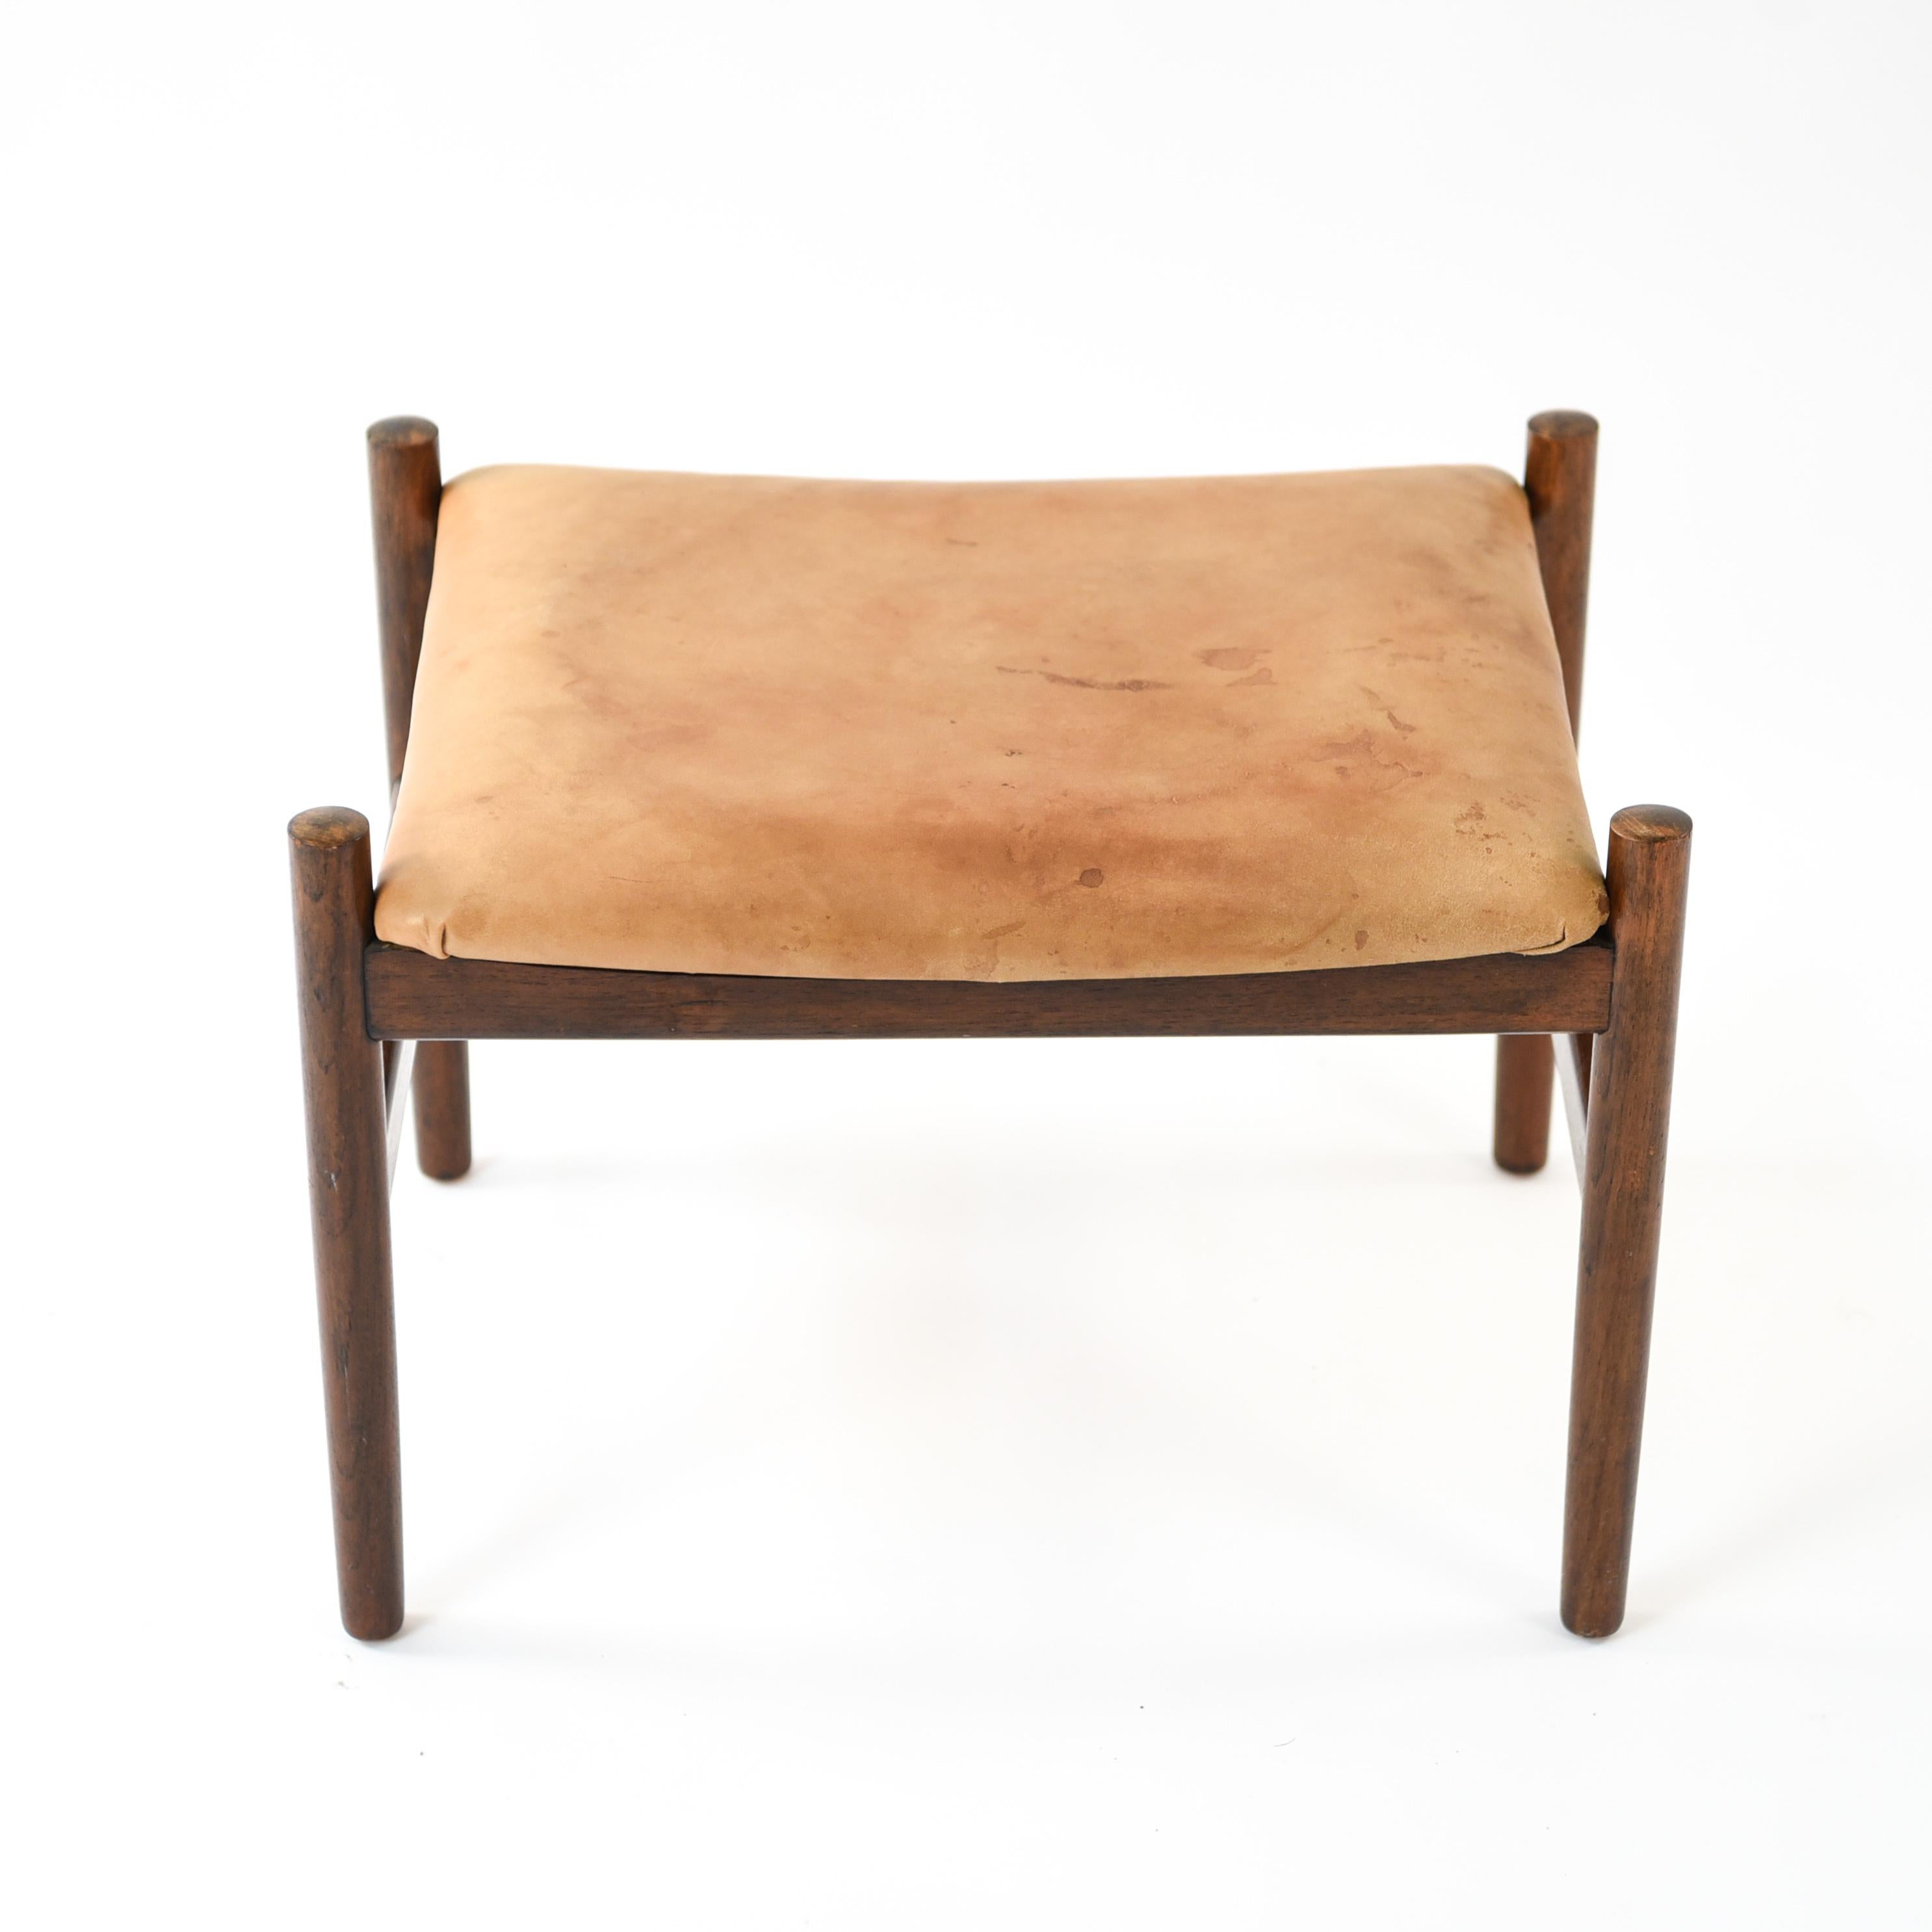 This is a nice little ottoman or stool by Danish midcentury manufacturer Spottrup Mobelfabrik. With leather upholstery that has original patina.